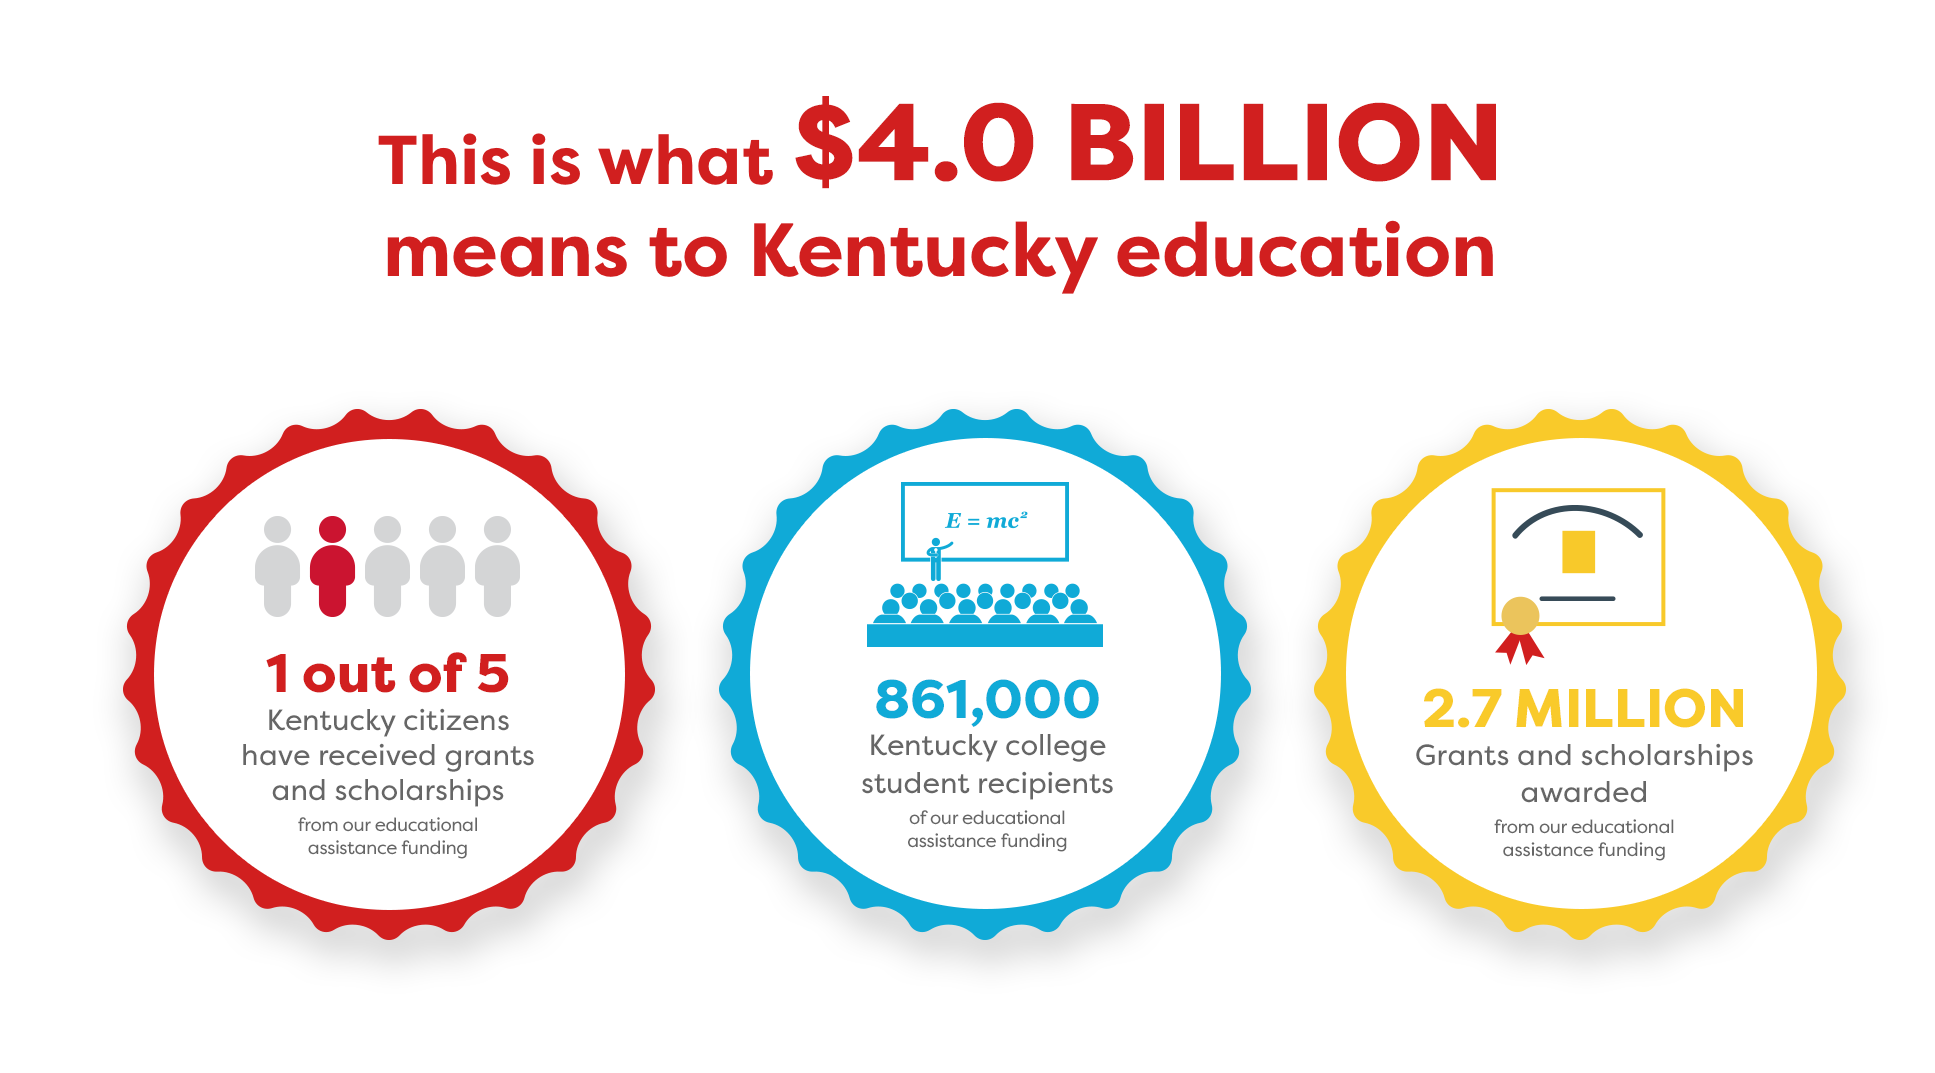 This is what $4 Billion means 1 out of 5 KY citizens received grants and scholarships, 860,000 KY college recipients, 2.59 Million grants and scholarships awarded